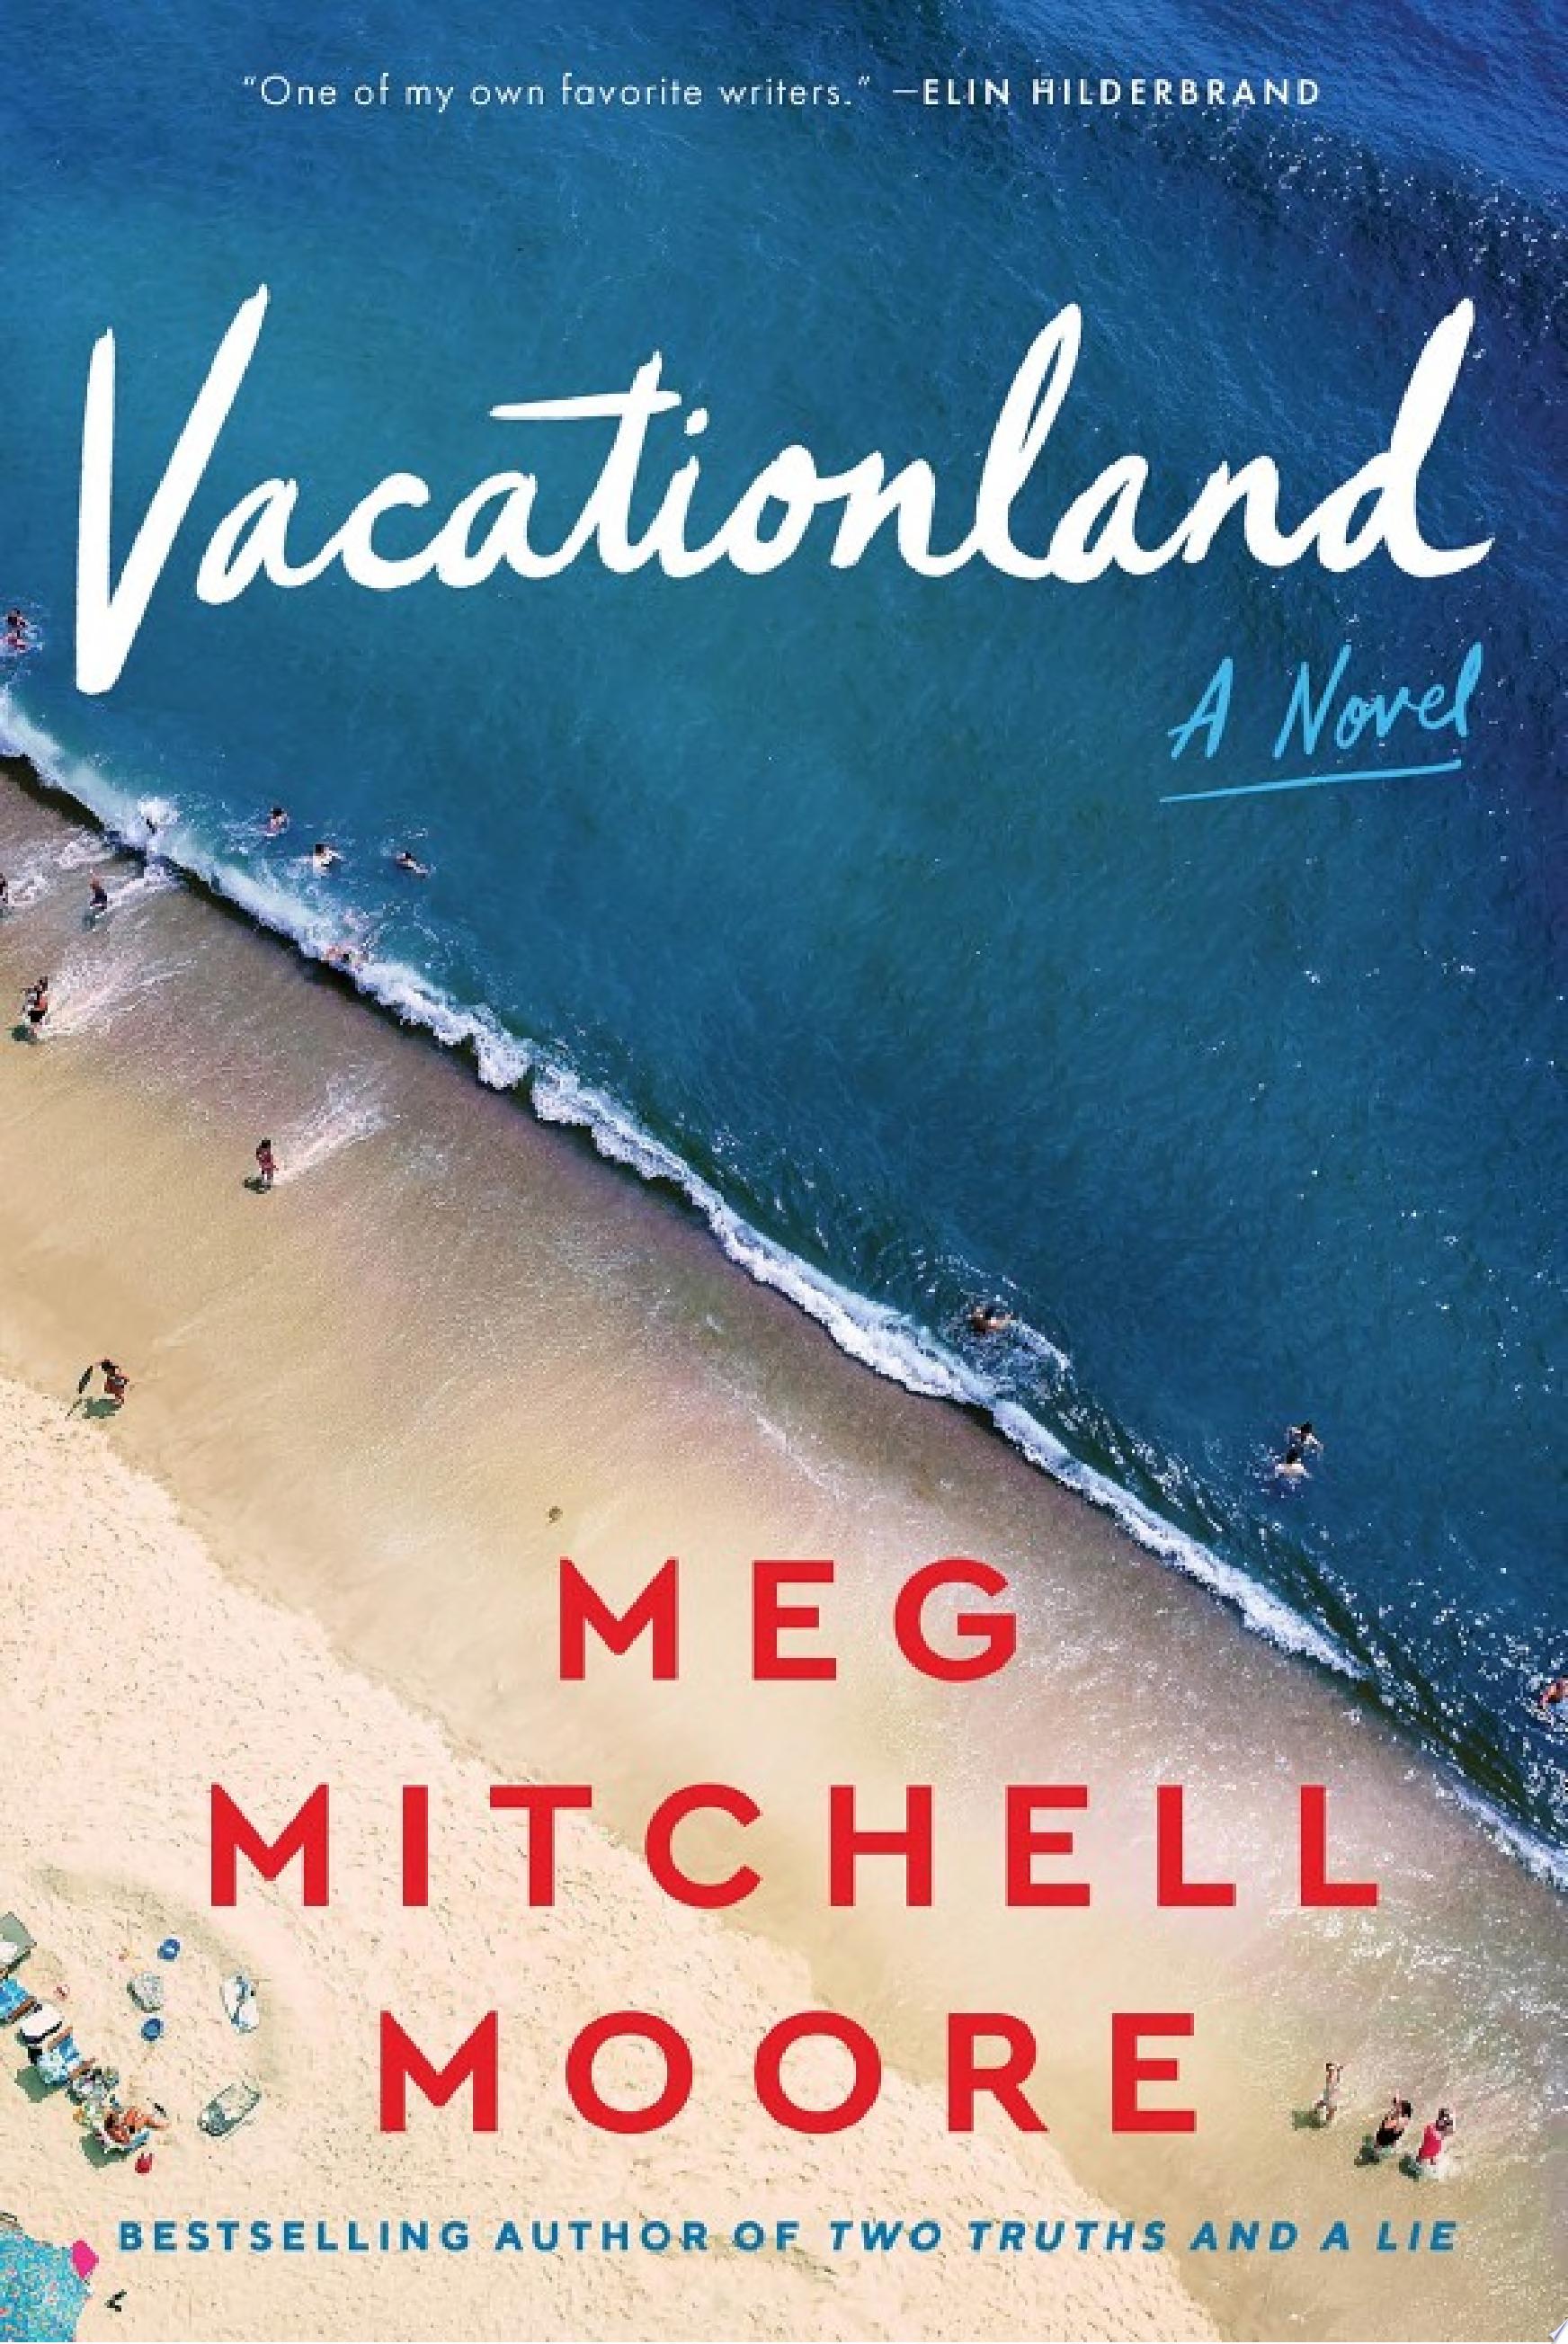 Image for "Vacationland"